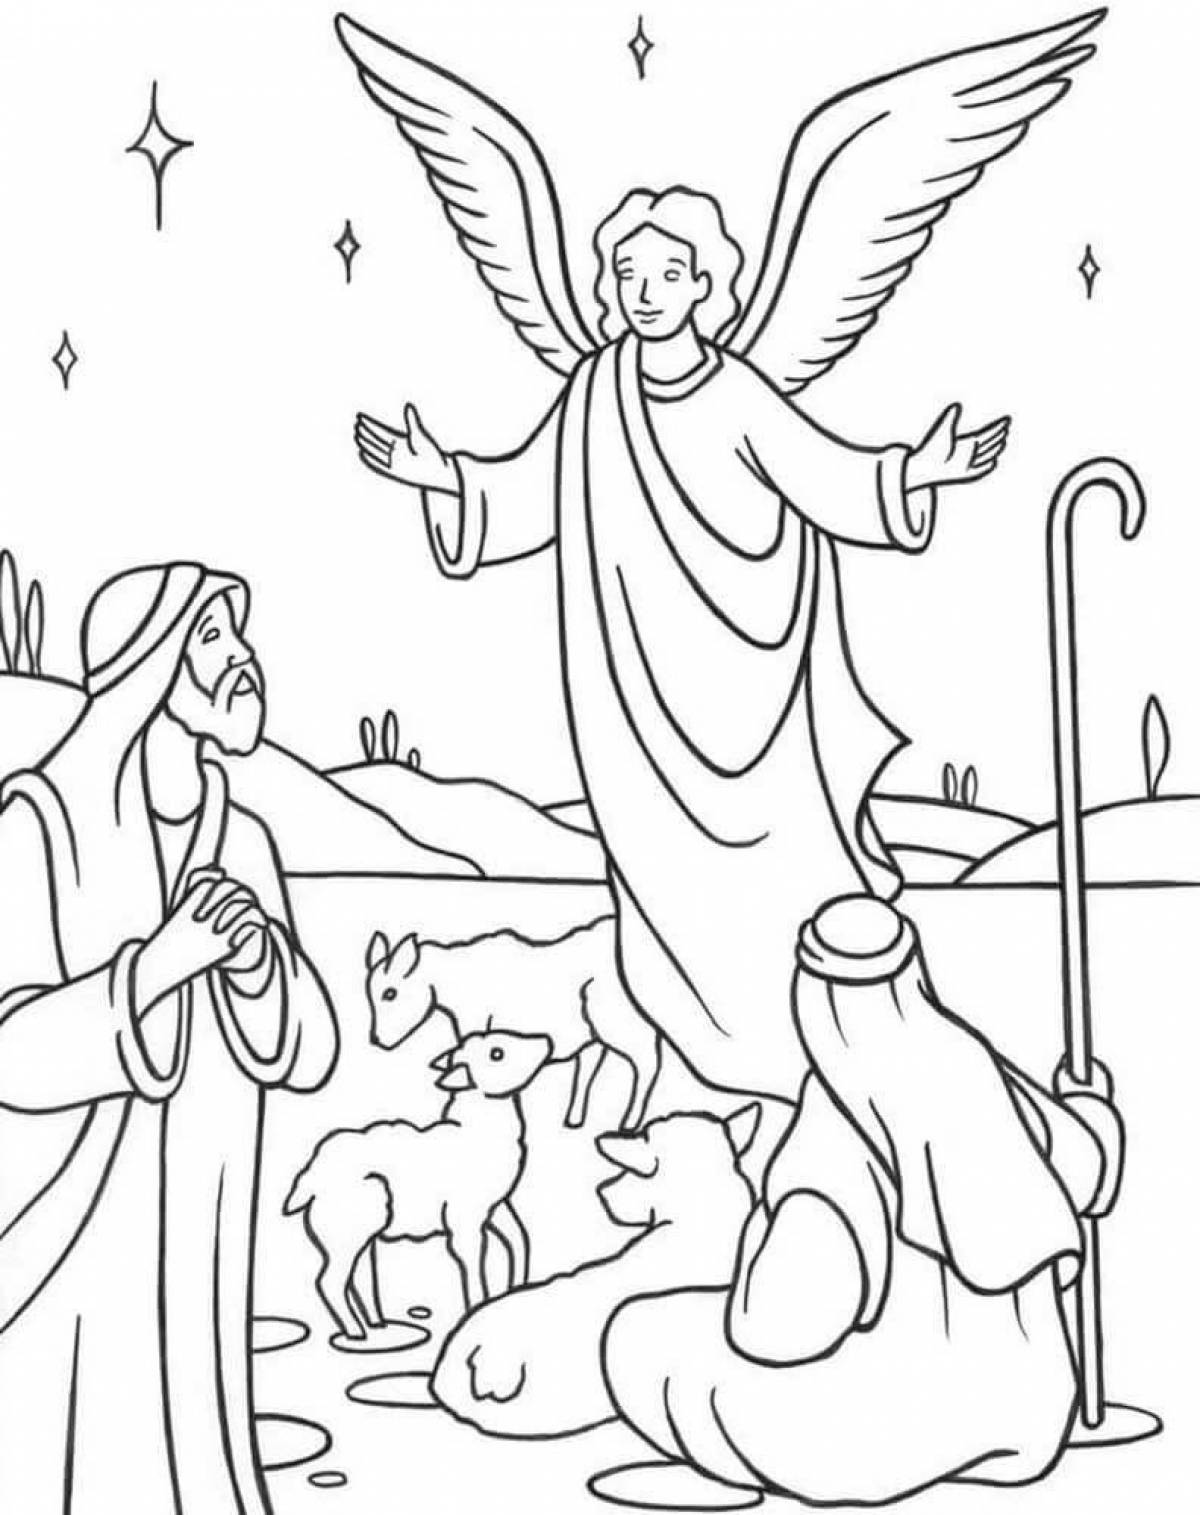 Awesome Christmas coloring book